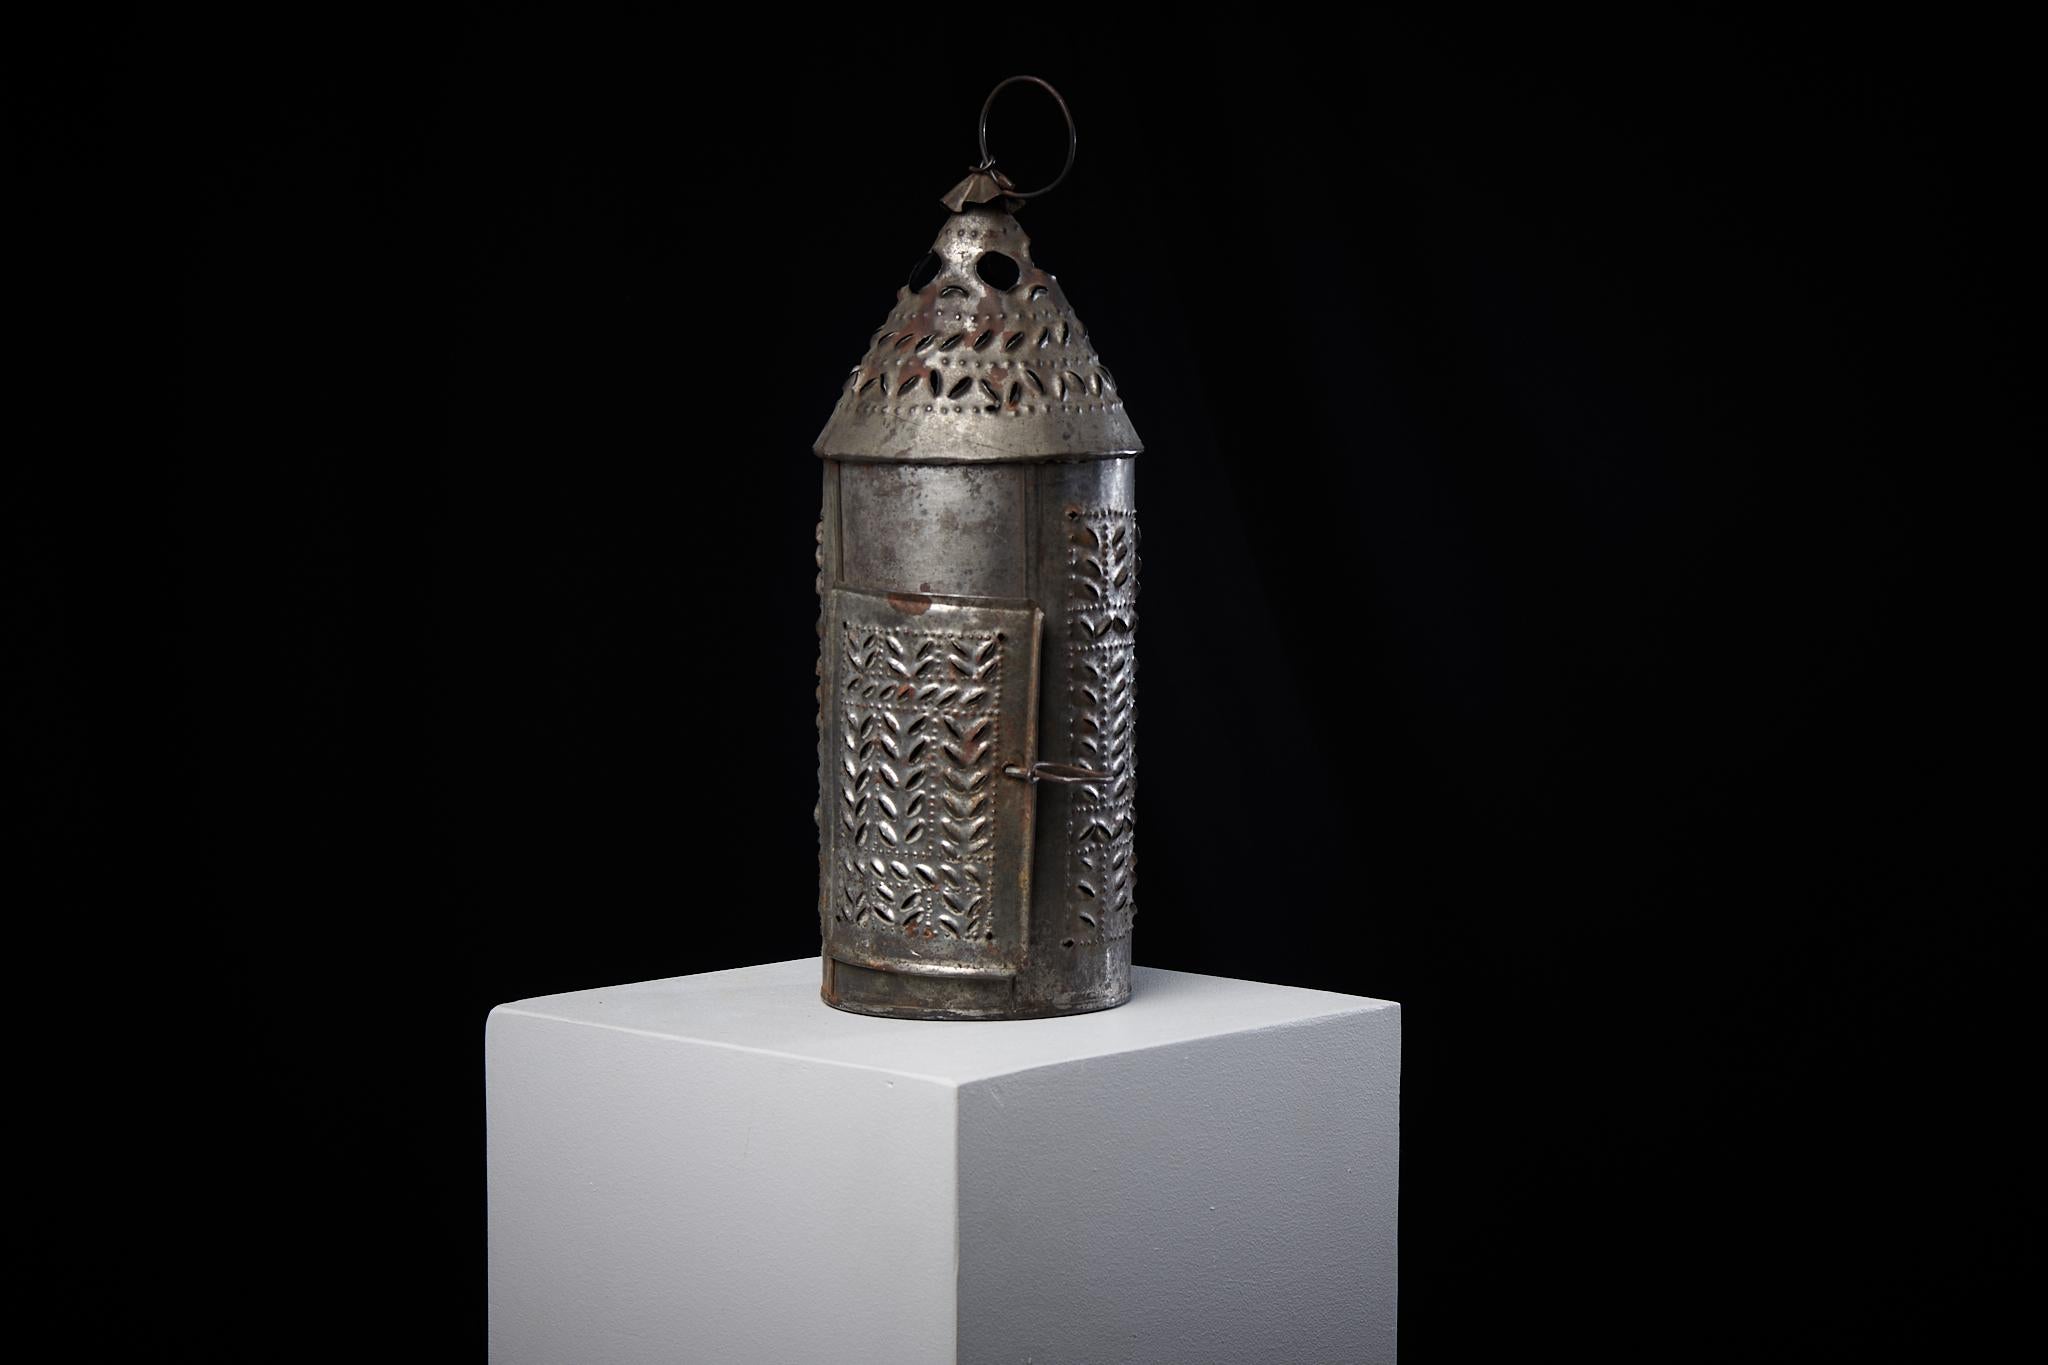 Unusual iron lantern from Sweden made during the mid 1800s. The lantern is folk art and has a cut-out pattern that’s been made by hand. This type of lantern is known as ”spiklykta”. They were used by women when they attended church during the cold